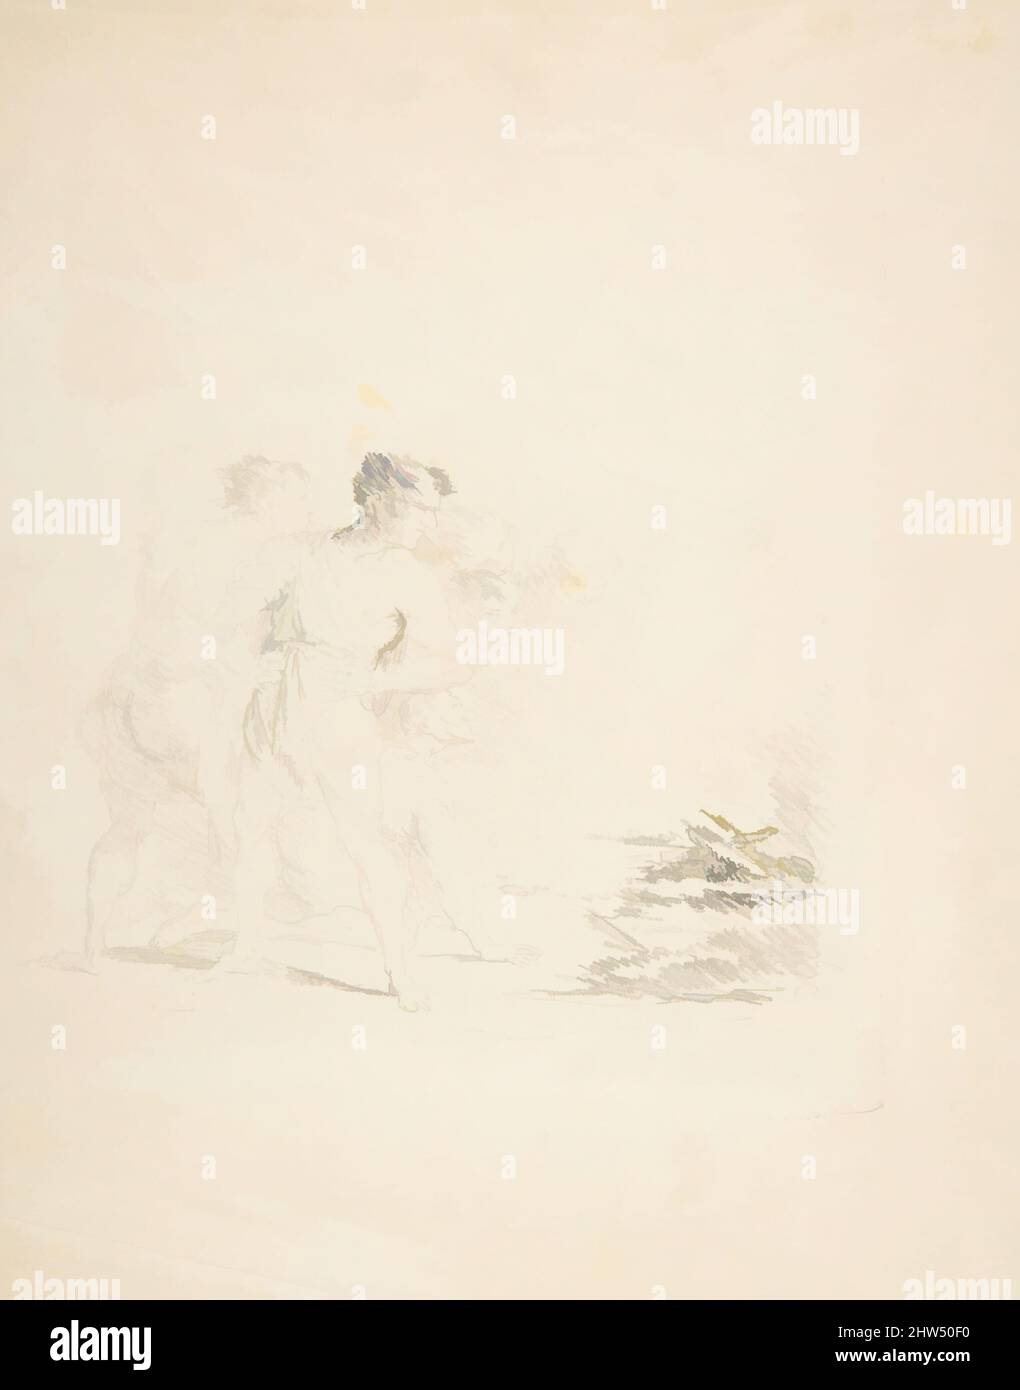 Art inspired by Men Spitting at a Fire, n.d., Lithograph, Sheet: 4 3/4 x 6 11/16 in. (11.99 x 16.99cm), Prints, Formerly attributed to Goya (Francisco de Goya y Lucientes) (Spanish, Fuendetodos 1746–1828 Bordeaux, Classic works modernized by Artotop with a splash of modernity. Shapes, color and value, eye-catching visual impact on art. Emotions through freedom of artworks in a contemporary way. A timeless message pursuing a wildly creative new direction. Artists turning to the digital medium and creating the Artotop NFT Stock Photo